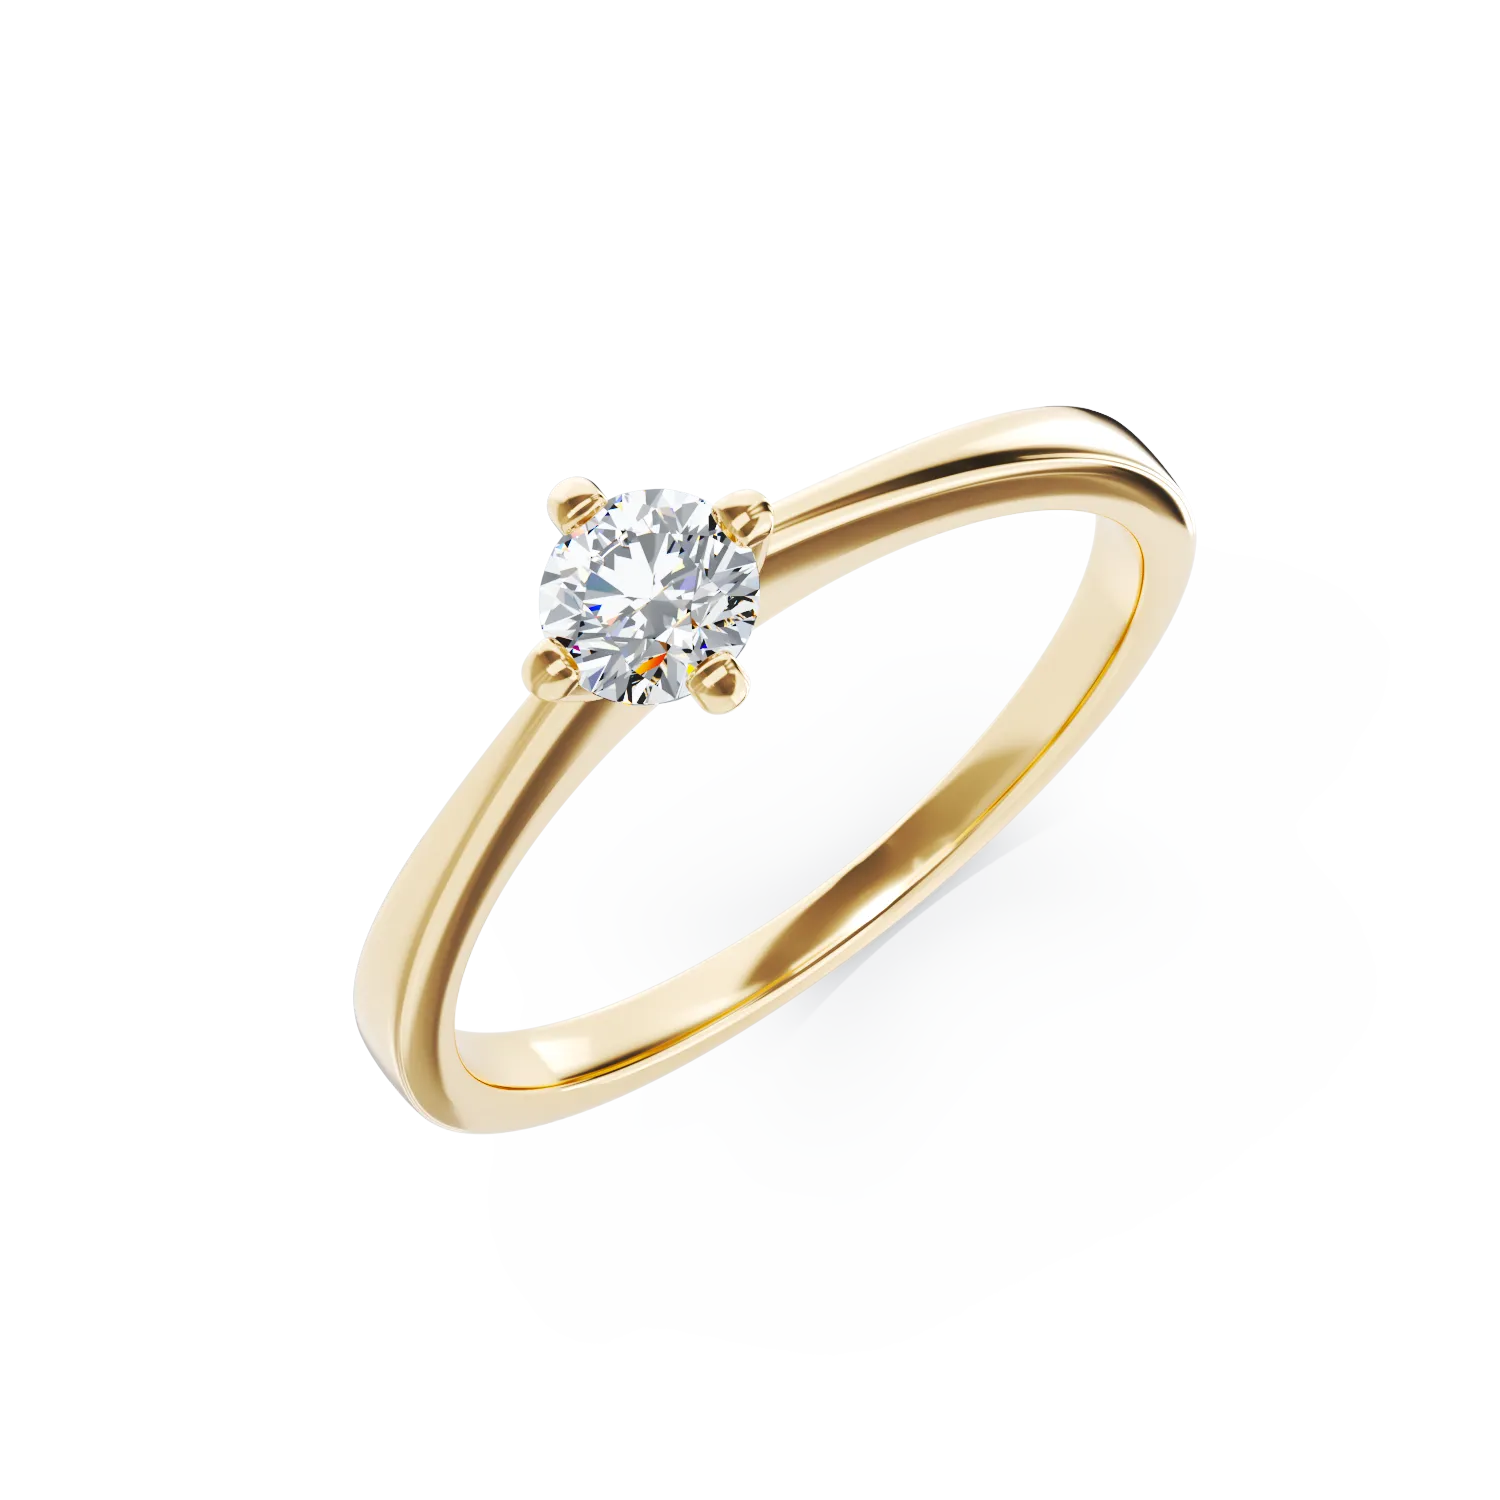 18K yellow gold engagement ring with 0.305ct diamond